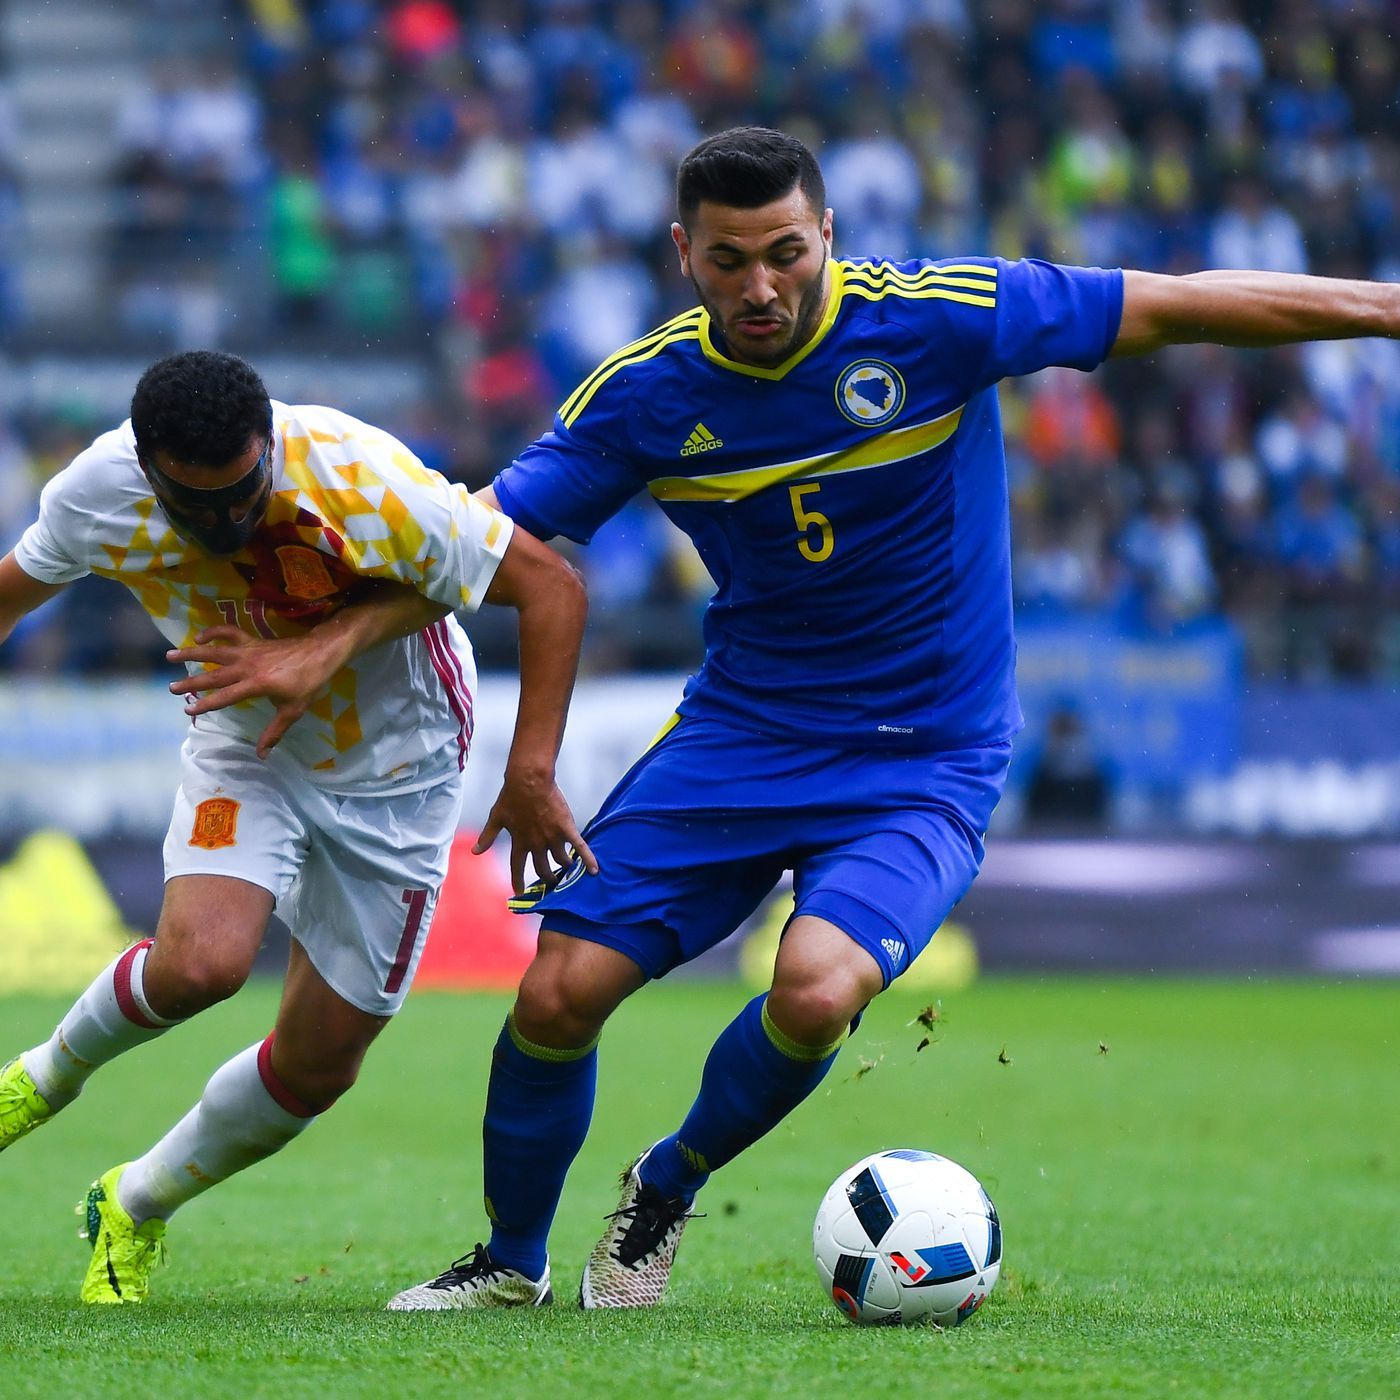 Reports emerge out of Bosnia that Sead Kolasinac has signed